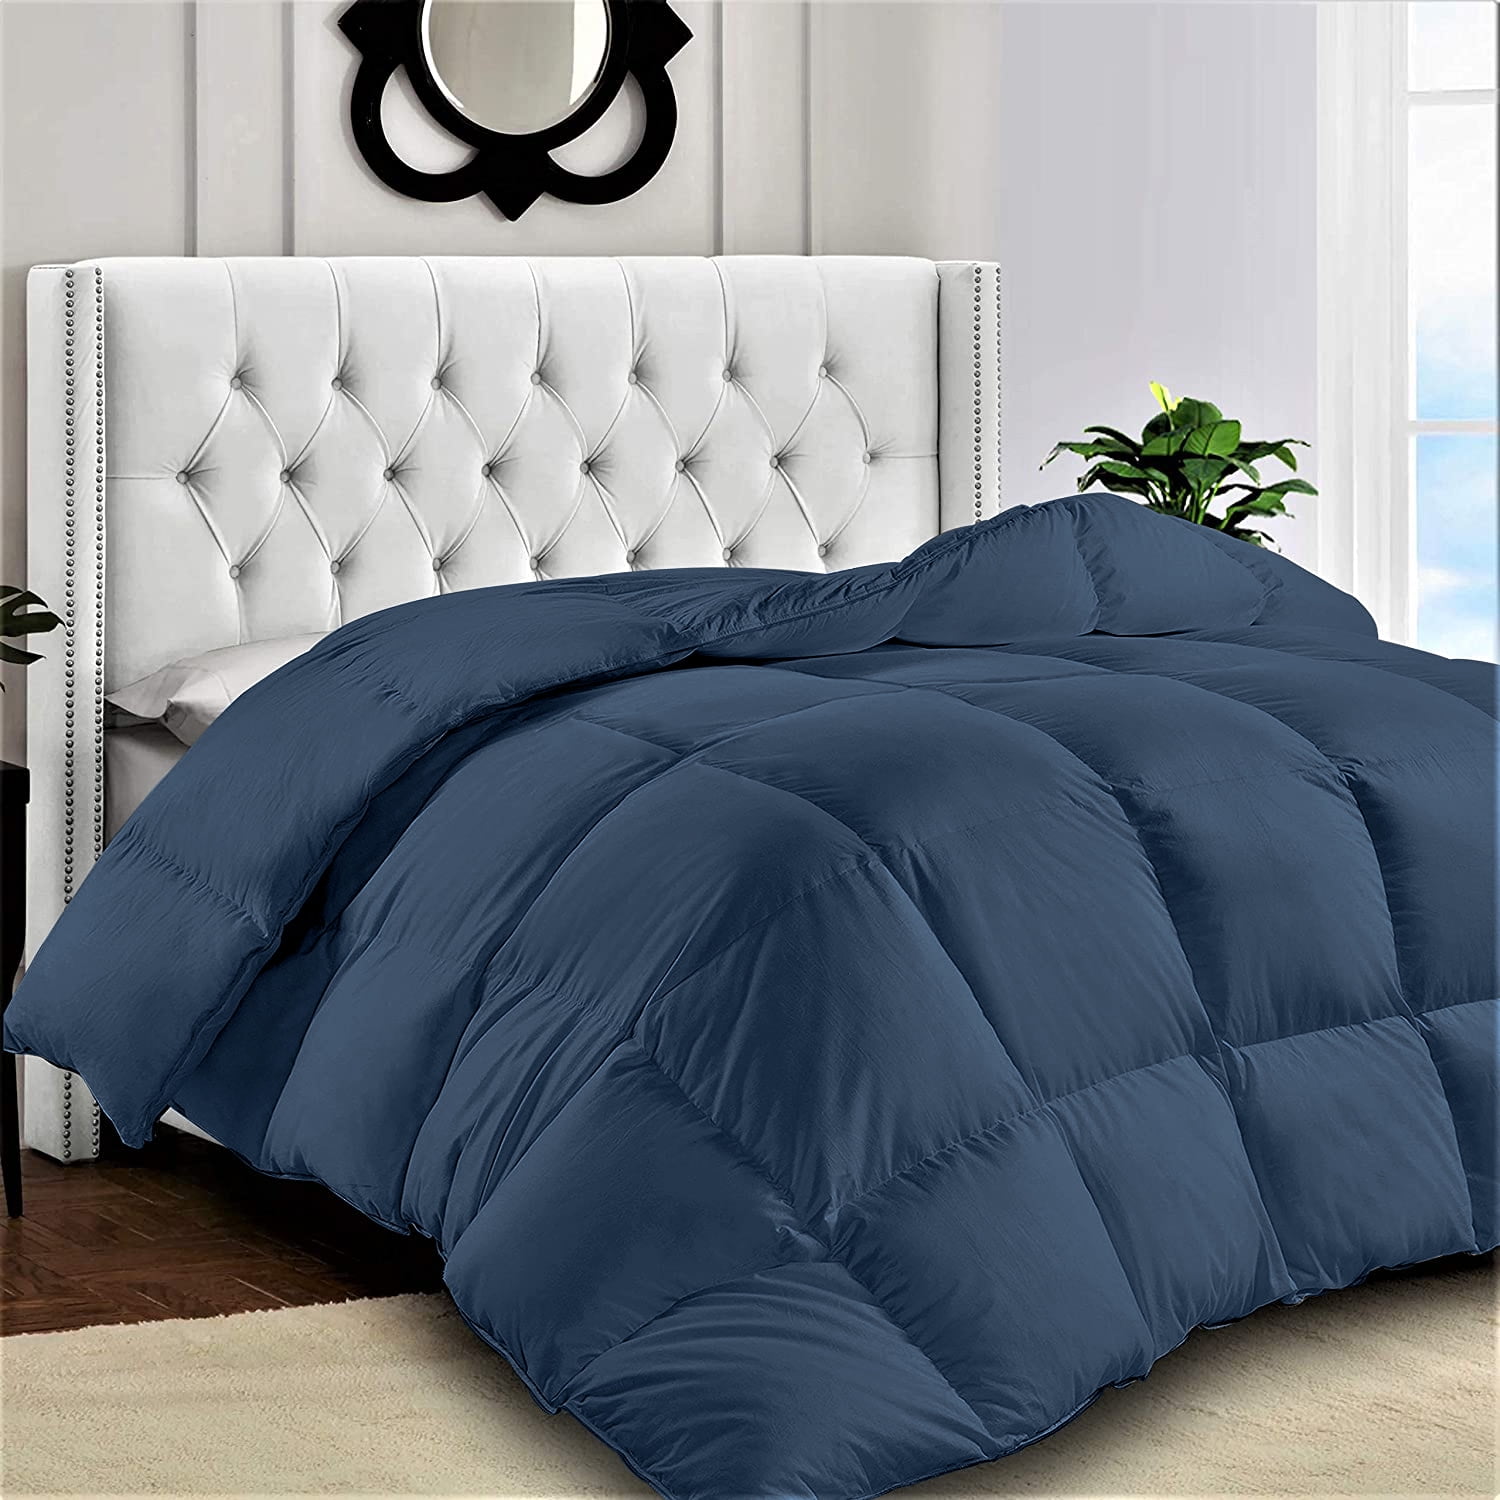 Bedding Comforter Duvet Insert With, How To Put A Down Comforter In Duvet Cover